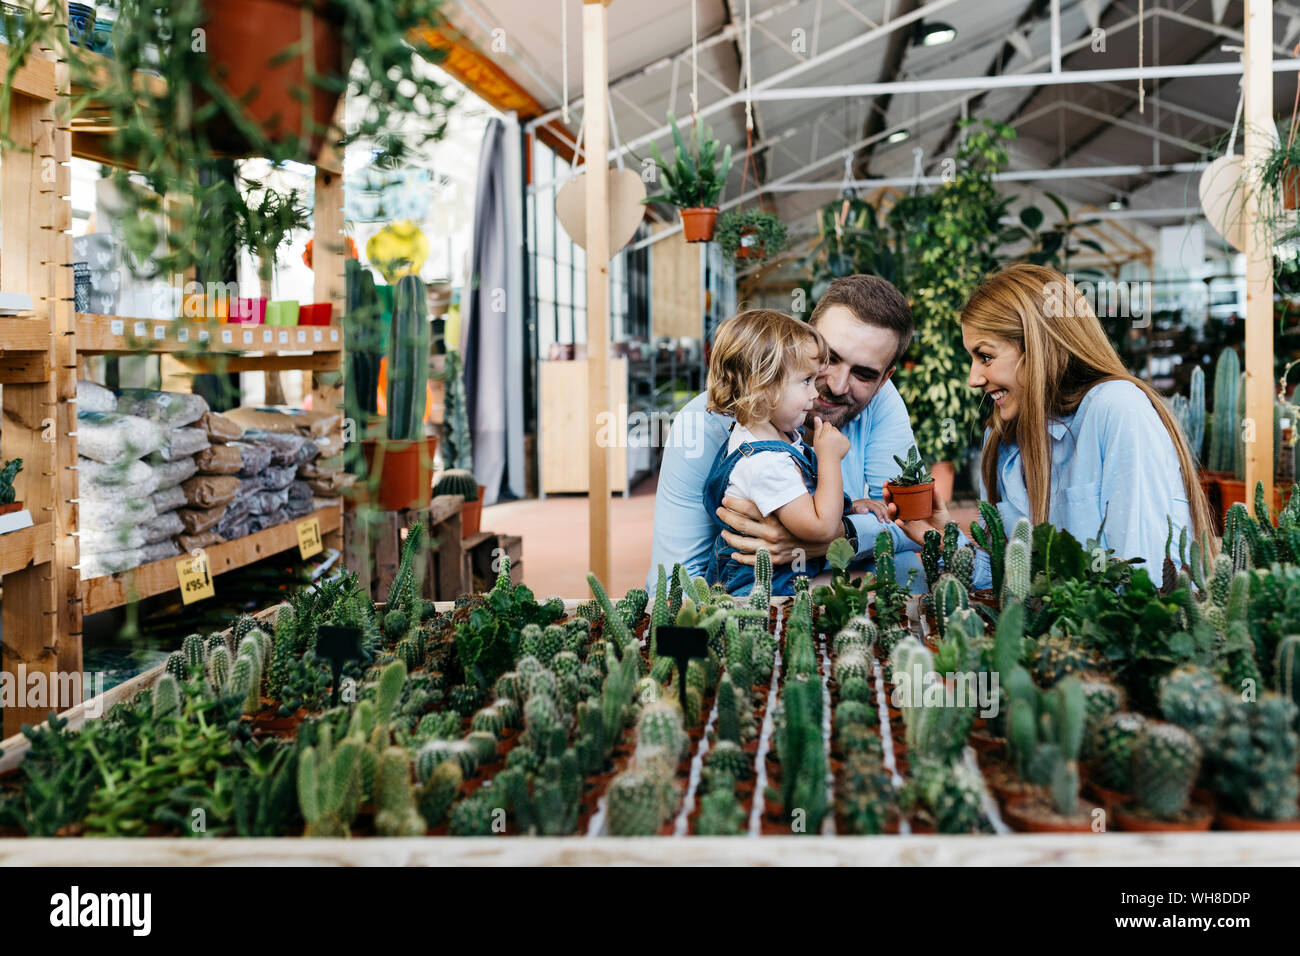 Mother, father and daughter in the cactus area inside a garden center Stock Photo